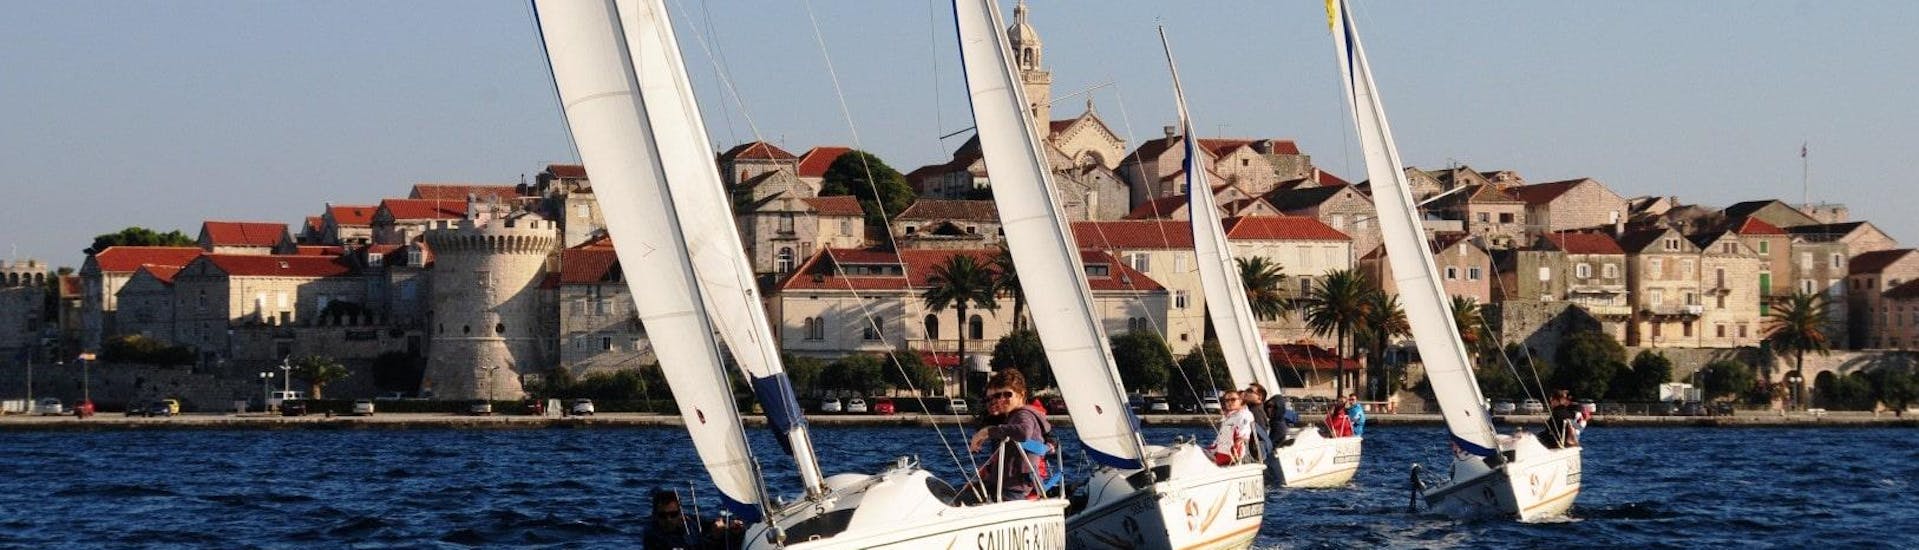 Half-day Sailing Keelboat Trip from Korčula with Swimming.